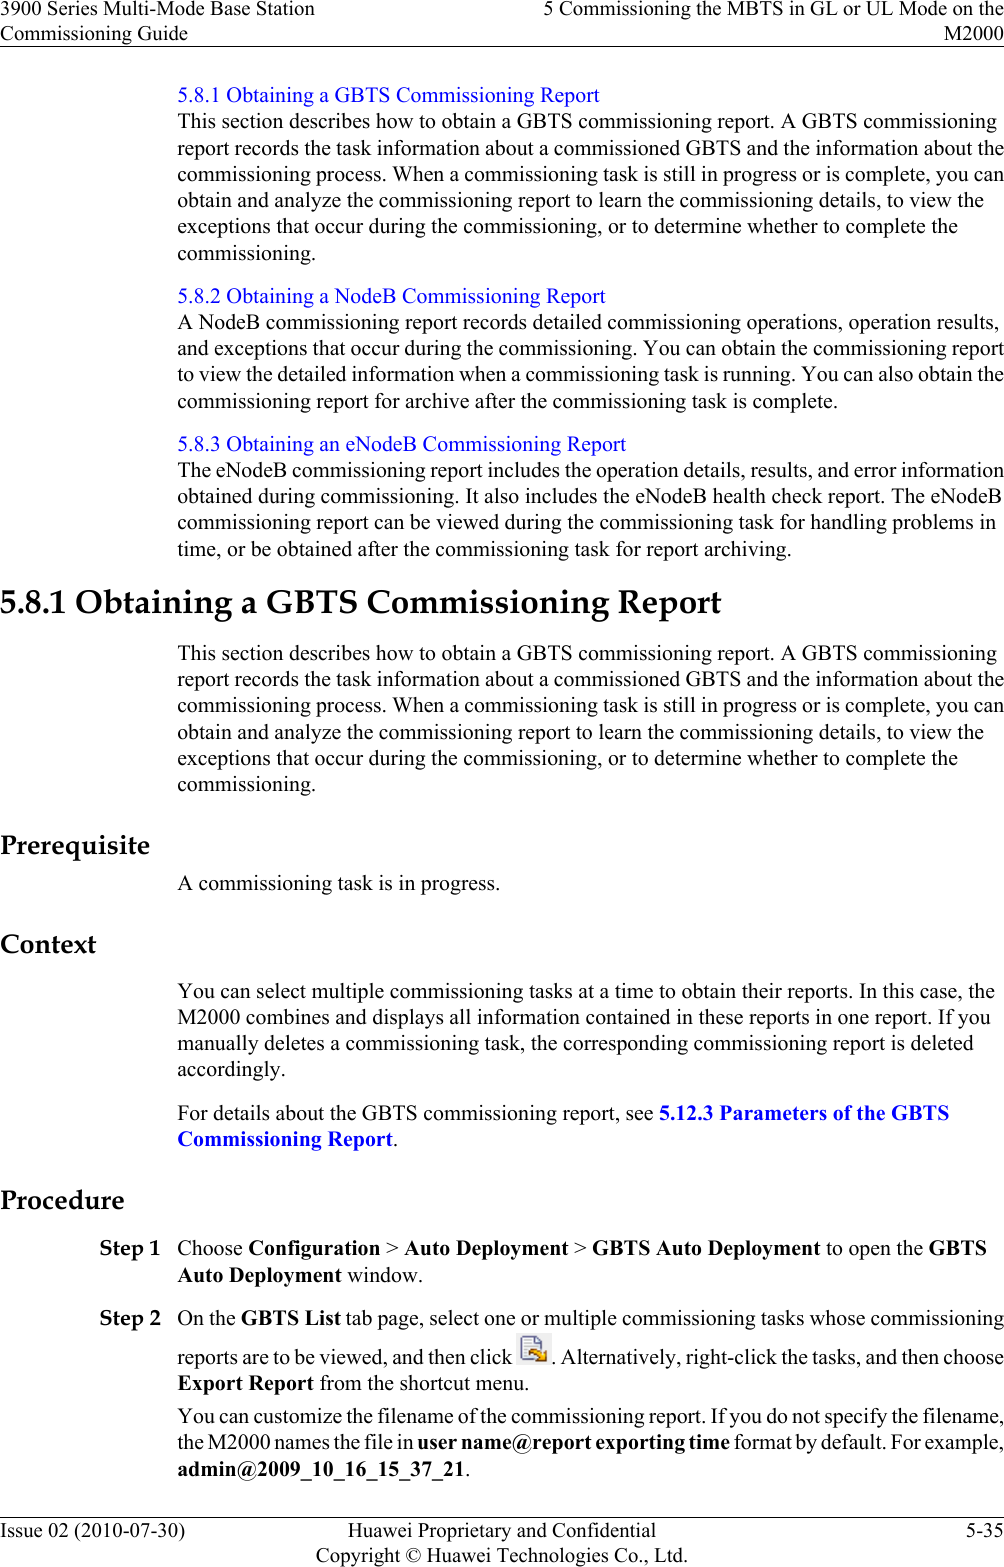 5.8.1 Obtaining a GBTS Commissioning ReportThis section describes how to obtain a GBTS commissioning report. A GBTS commissioningreport records the task information about a commissioned GBTS and the information about thecommissioning process. When a commissioning task is still in progress or is complete, you canobtain and analyze the commissioning report to learn the commissioning details, to view theexceptions that occur during the commissioning, or to determine whether to complete thecommissioning.5.8.2 Obtaining a NodeB Commissioning ReportA NodeB commissioning report records detailed commissioning operations, operation results,and exceptions that occur during the commissioning. You can obtain the commissioning reportto view the detailed information when a commissioning task is running. You can also obtain thecommissioning report for archive after the commissioning task is complete.5.8.3 Obtaining an eNodeB Commissioning ReportThe eNodeB commissioning report includes the operation details, results, and error informationobtained during commissioning. It also includes the eNodeB health check report. The eNodeBcommissioning report can be viewed during the commissioning task for handling problems intime, or be obtained after the commissioning task for report archiving.5.8.1 Obtaining a GBTS Commissioning ReportThis section describes how to obtain a GBTS commissioning report. A GBTS commissioningreport records the task information about a commissioned GBTS and the information about thecommissioning process. When a commissioning task is still in progress or is complete, you canobtain and analyze the commissioning report to learn the commissioning details, to view theexceptions that occur during the commissioning, or to determine whether to complete thecommissioning.PrerequisiteA commissioning task is in progress.ContextYou can select multiple commissioning tasks at a time to obtain their reports. In this case, theM2000 combines and displays all information contained in these reports in one report. If youmanually deletes a commissioning task, the corresponding commissioning report is deletedaccordingly.For details about the GBTS commissioning report, see 5.12.3 Parameters of the GBTSCommissioning Report.ProcedureStep 1 Choose Configuration &gt; Auto Deployment &gt; GBTS Auto Deployment to open the GBTSAuto Deployment window.Step 2 On the GBTS List tab page, select one or multiple commissioning tasks whose commissioningreports are to be viewed, and then click  . Alternatively, right-click the tasks, and then chooseExport Report from the shortcut menu.You can customize the filename of the commissioning report. If you do not specify the filename,the M2000 names the file in user name@report exporting time format by default. For example,admin@2009_10_16_15_37_21.3900 Series Multi-Mode Base StationCommissioning Guide5 Commissioning the MBTS in GL or UL Mode on theM2000Issue 02 (2010-07-30) Huawei Proprietary and ConfidentialCopyright © Huawei Technologies Co., Ltd.5-35